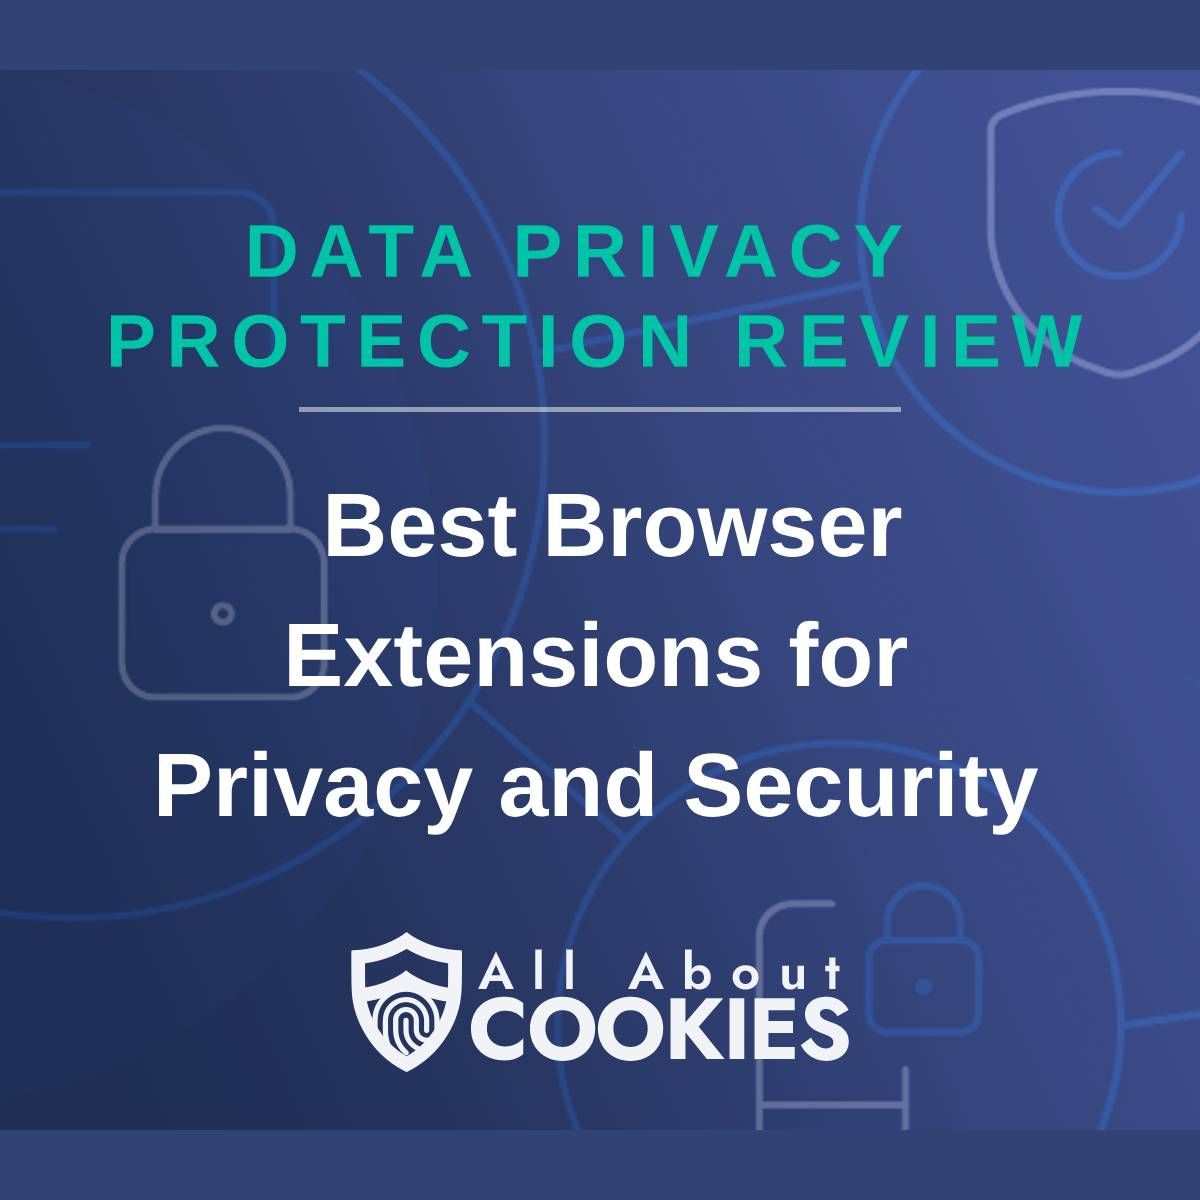 A blue background with images of locks and shields with the text &quot;Data Privacy Protection Review  Best Browser Extensions for Privacy and Security&quot; and the All About Cookies logo. 